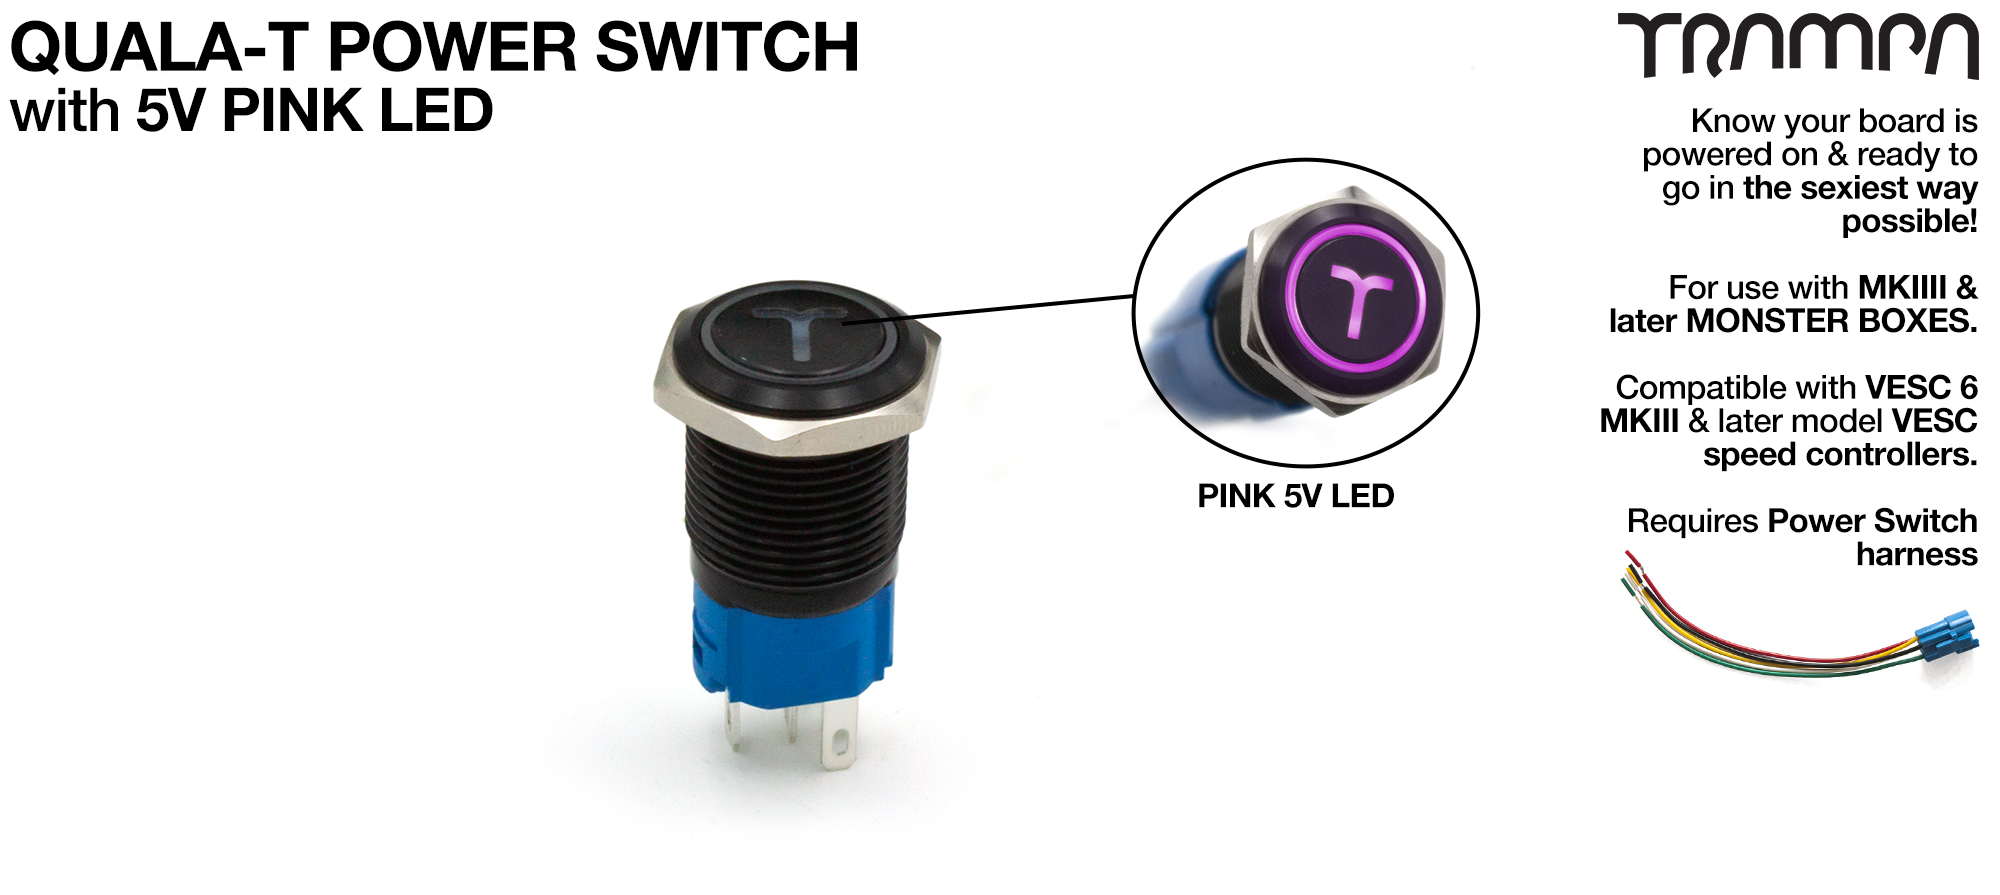 TRAMPA Switch with 5V PINKY/PURPLE LED QUALA-T & 16mm Stainless Steel Fixing Nut 